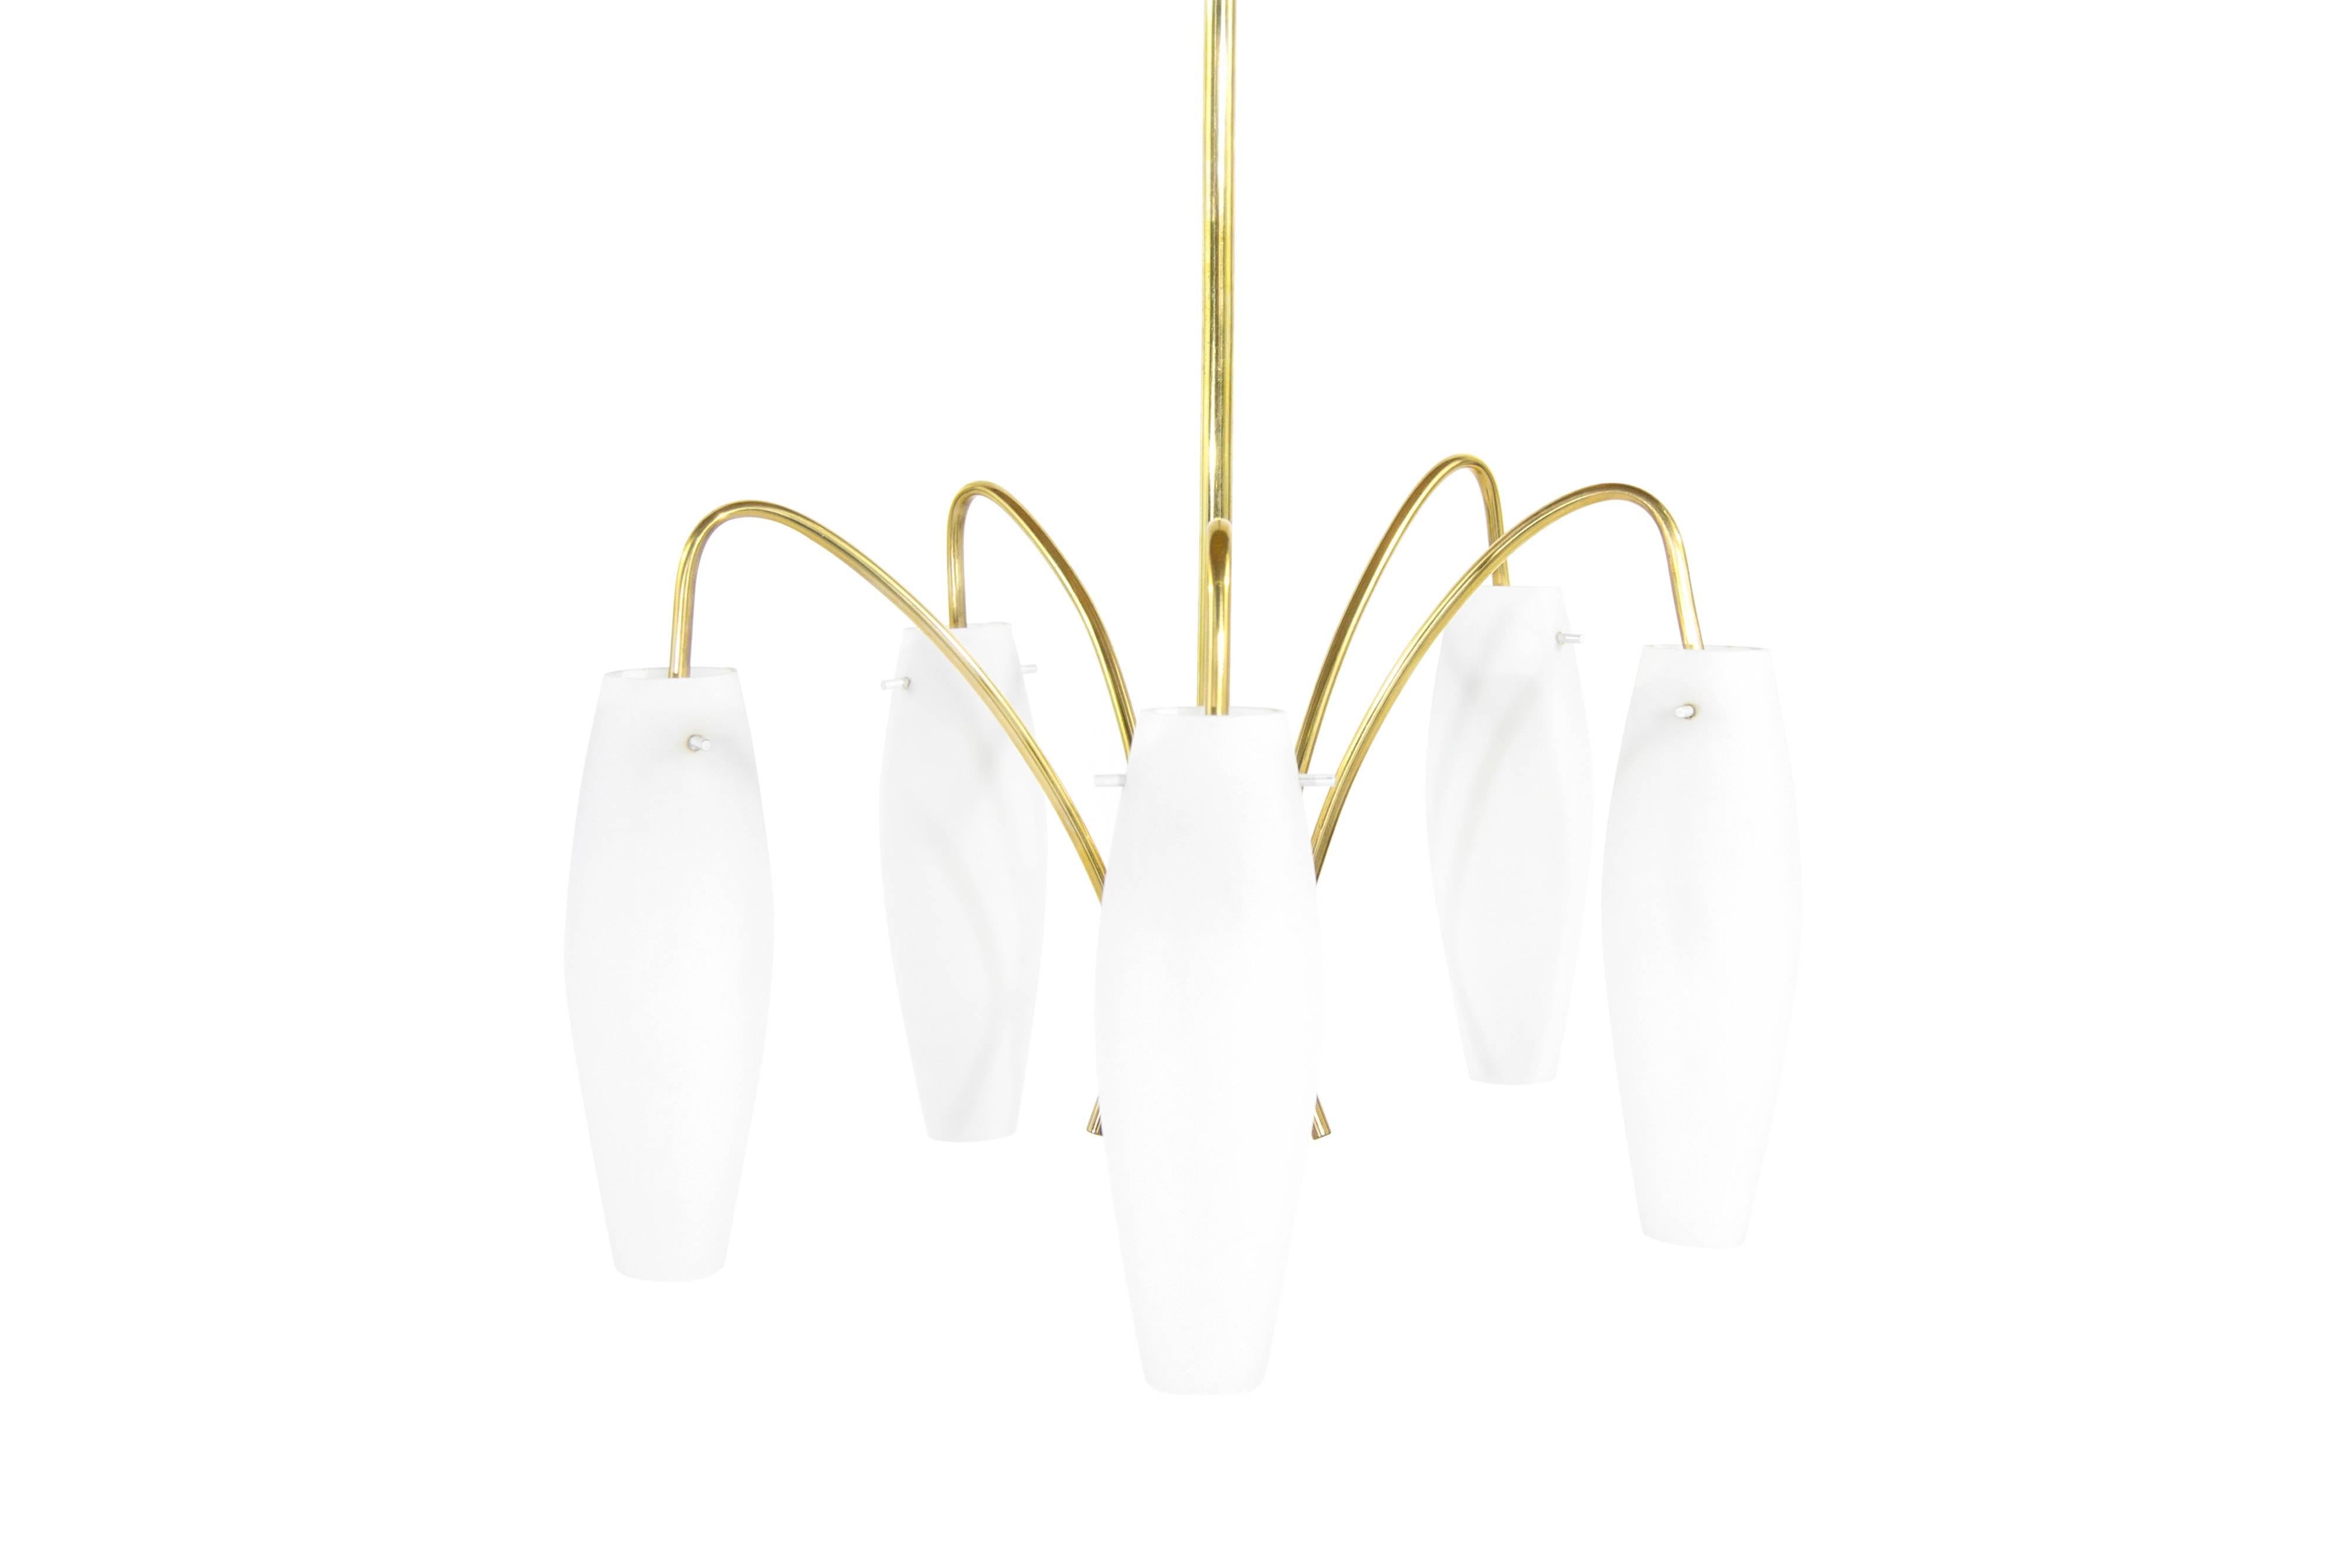 A petite light fixture in the style of Stilnovo; featuring five brass arms ending in opaque glass ovoid shades. Newly rewired. Ceiling drop adjustable.